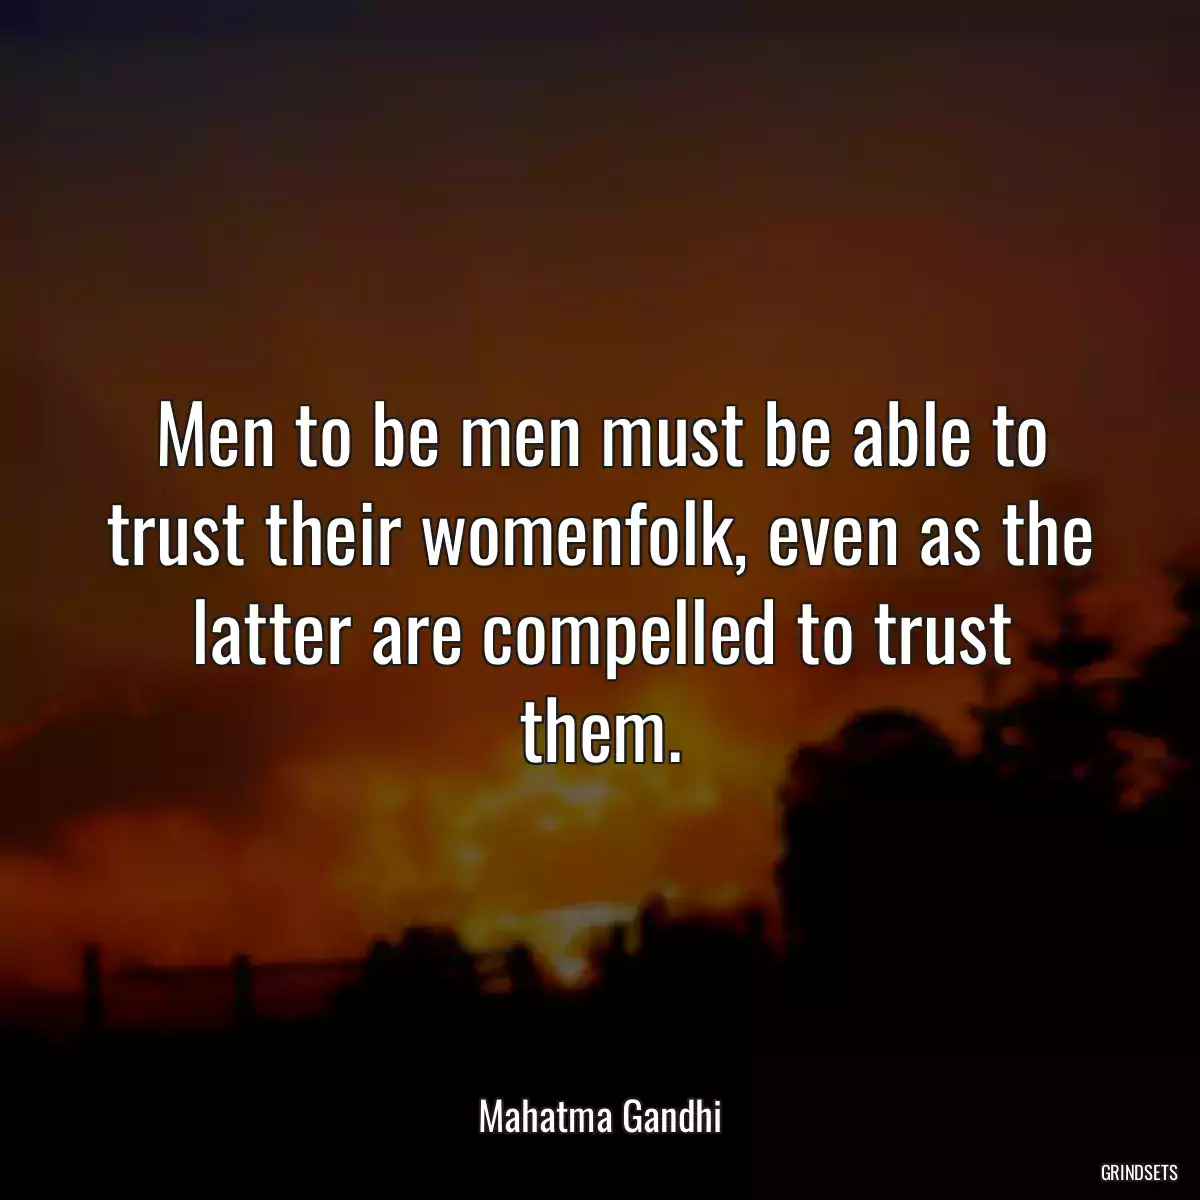 Men to be men must be able to trust their womenfolk, even as the latter are compelled to trust them.